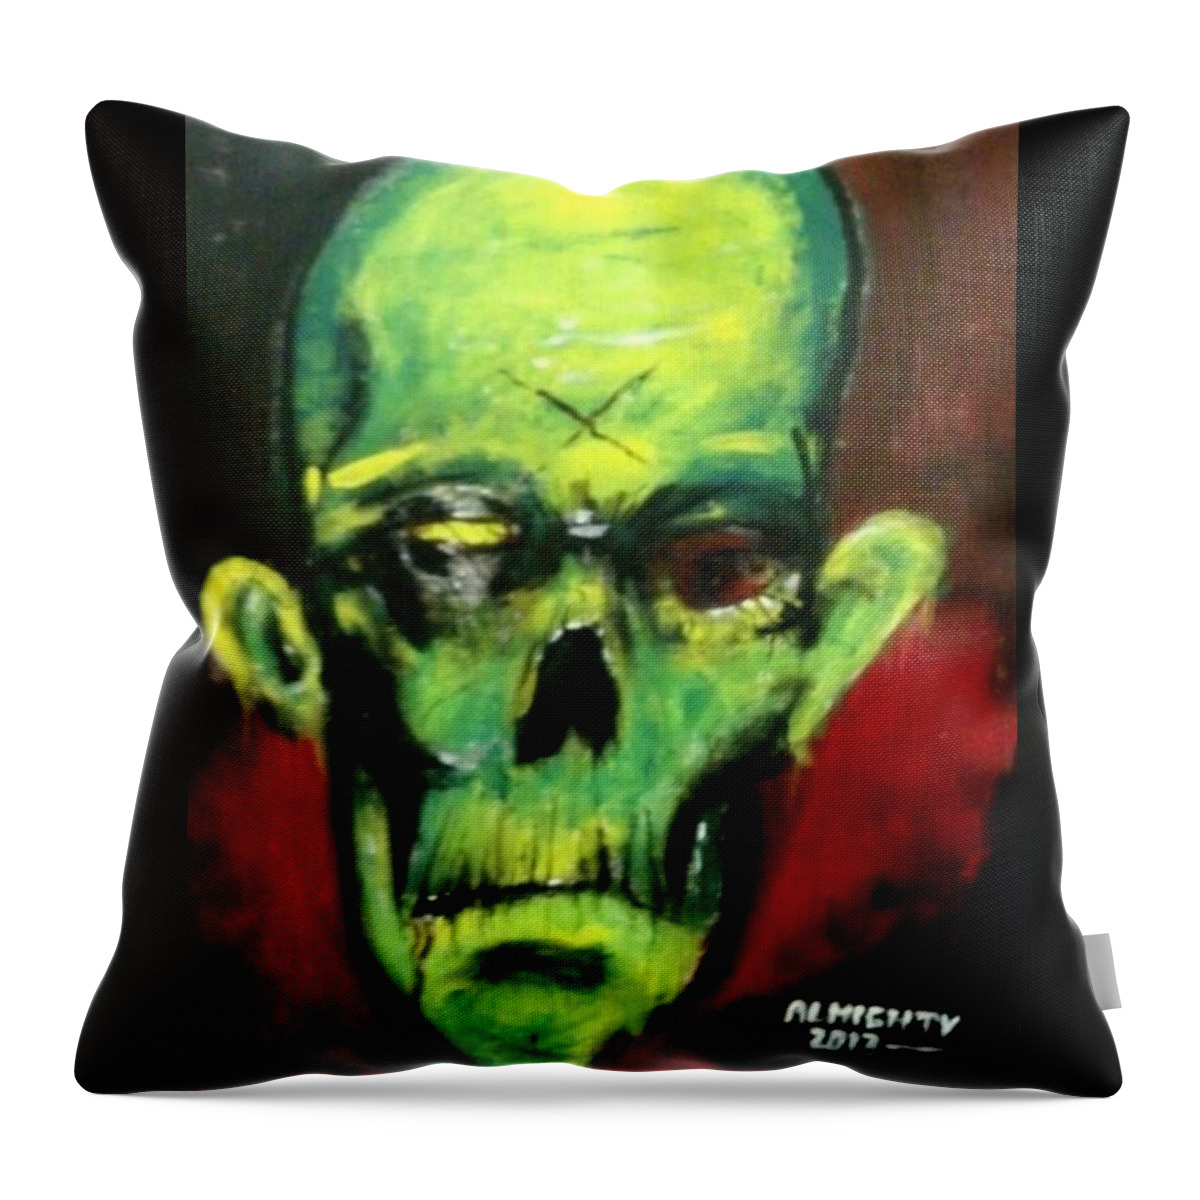 Zombie Throw Pillow featuring the painting Zombie by Ryan Almighty